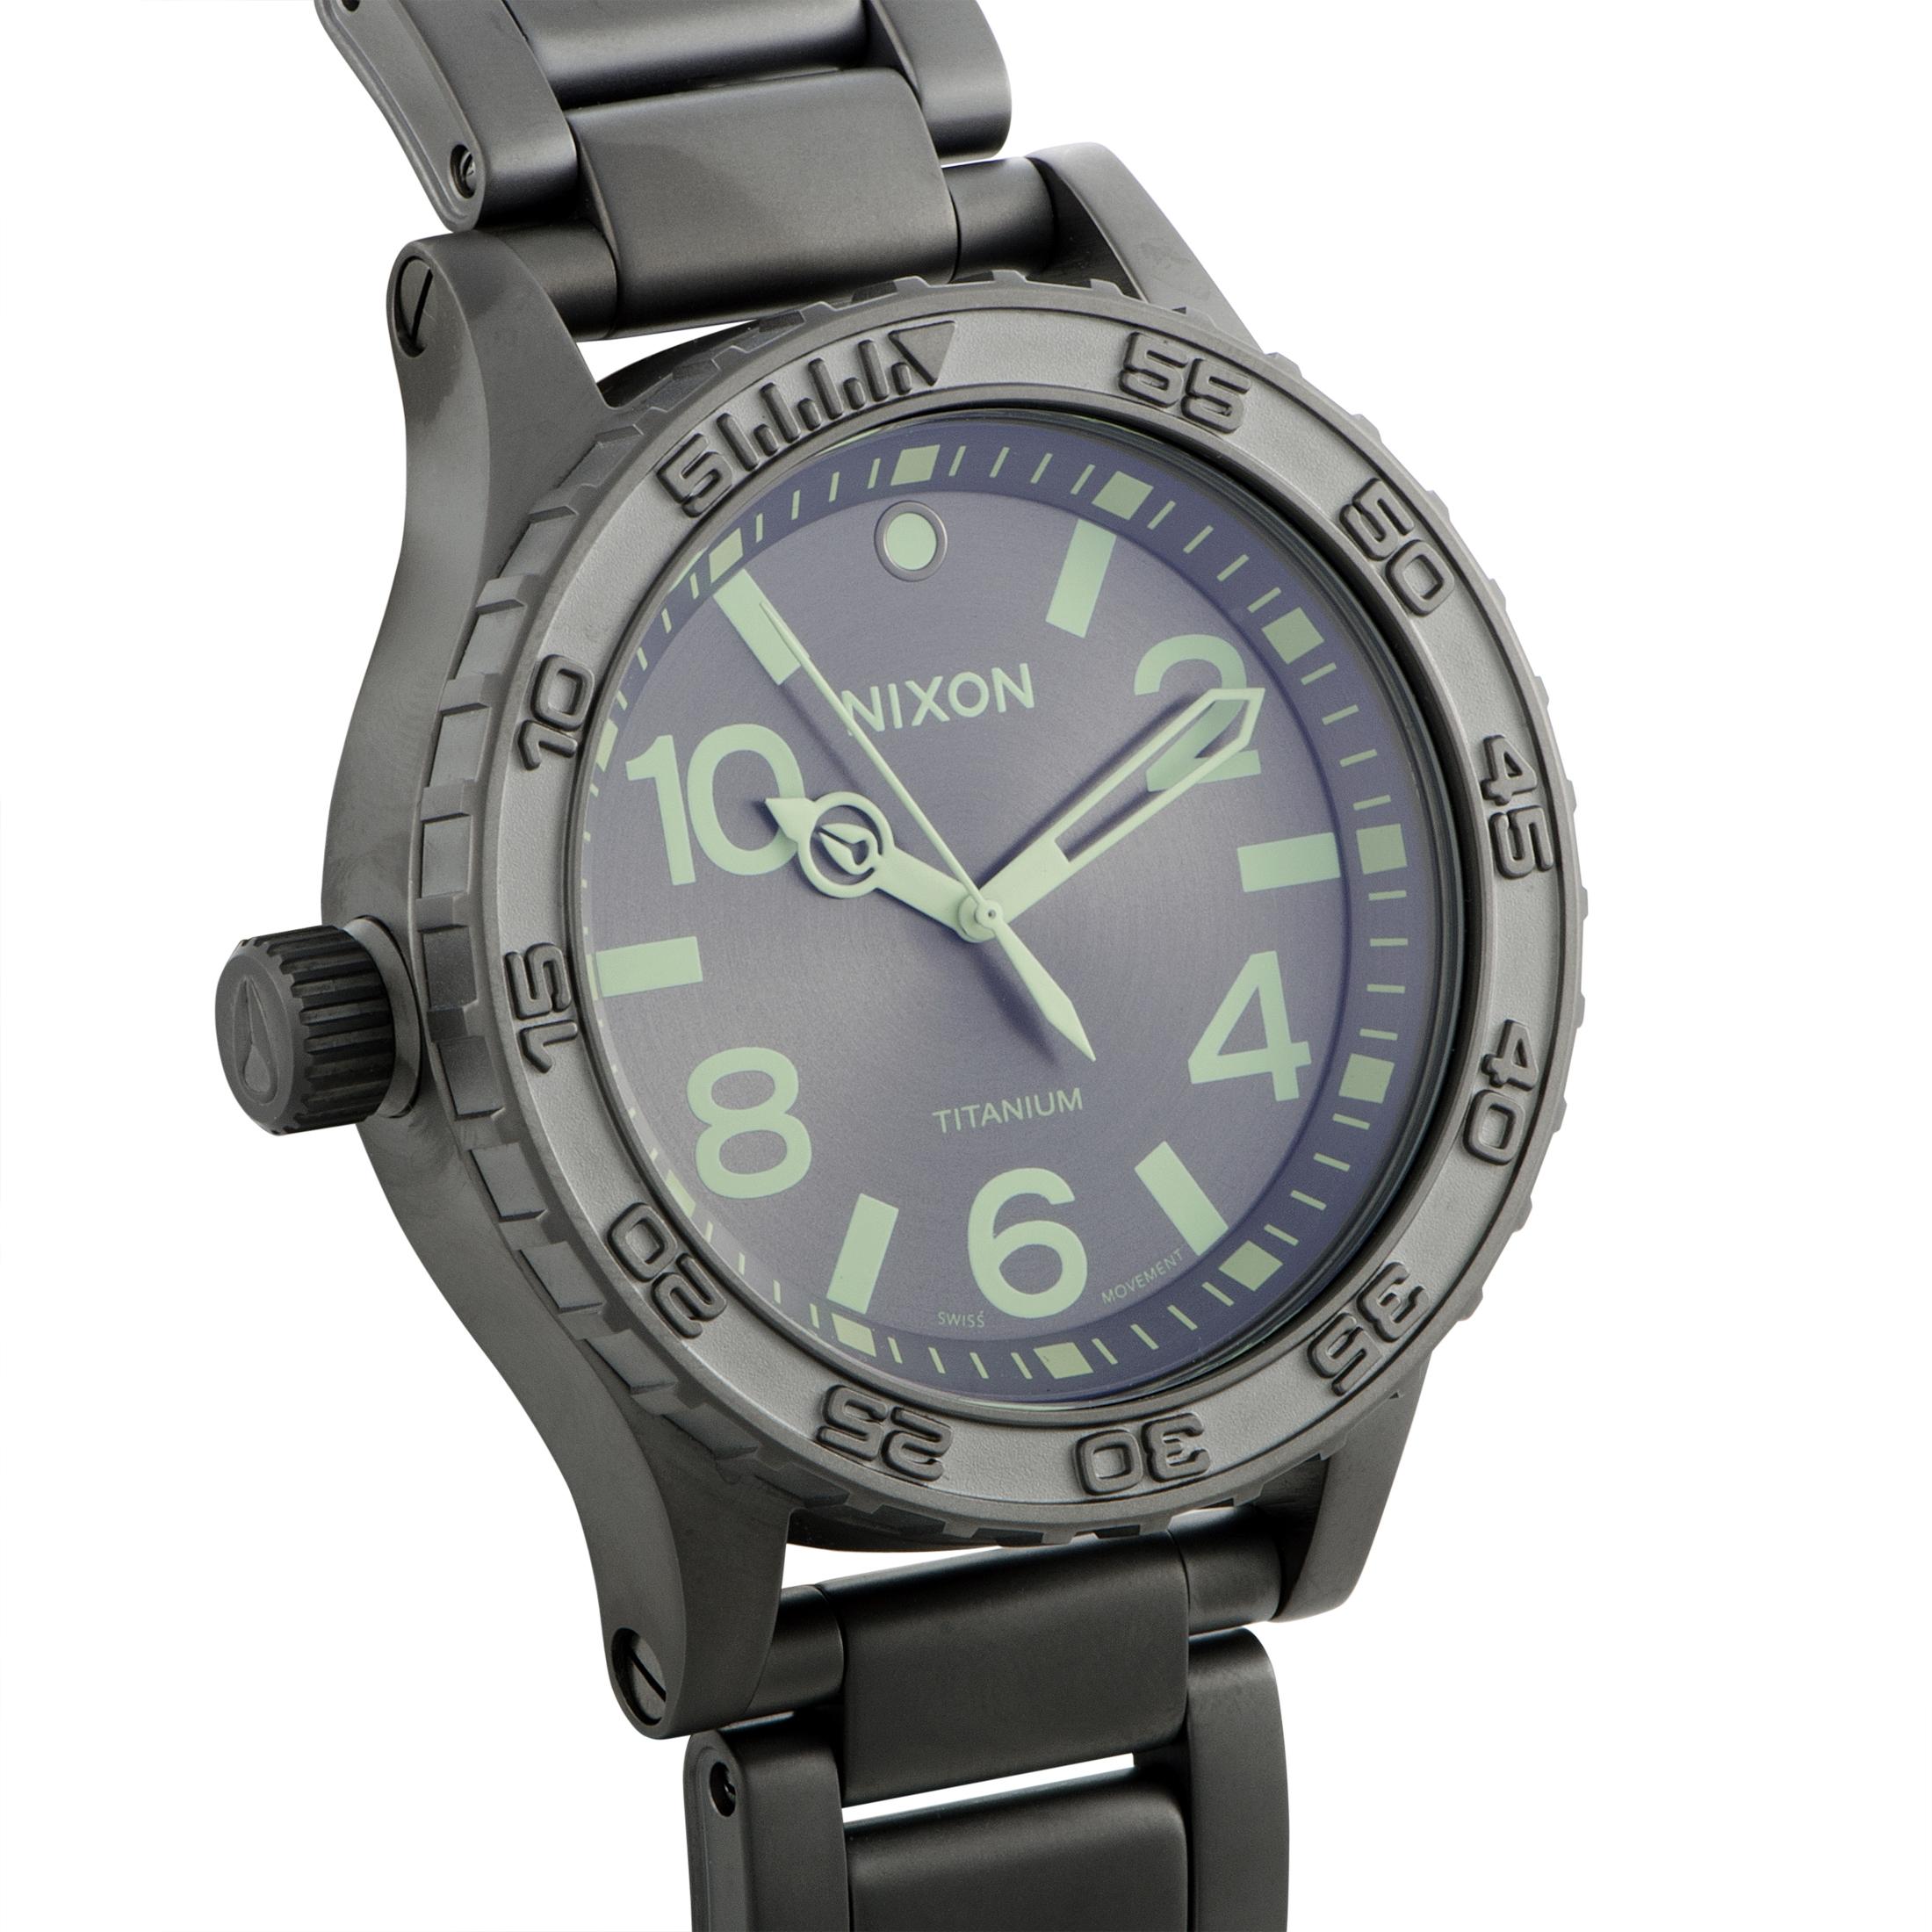 The Nixon 51-30 Titanium boasts a 51 mm case made of titanium that is presented on a matching titanium bracelet. The gray dial with Arabic numerals features central hours, minutes and seconds. The watch is powered by a quartz movement and offers